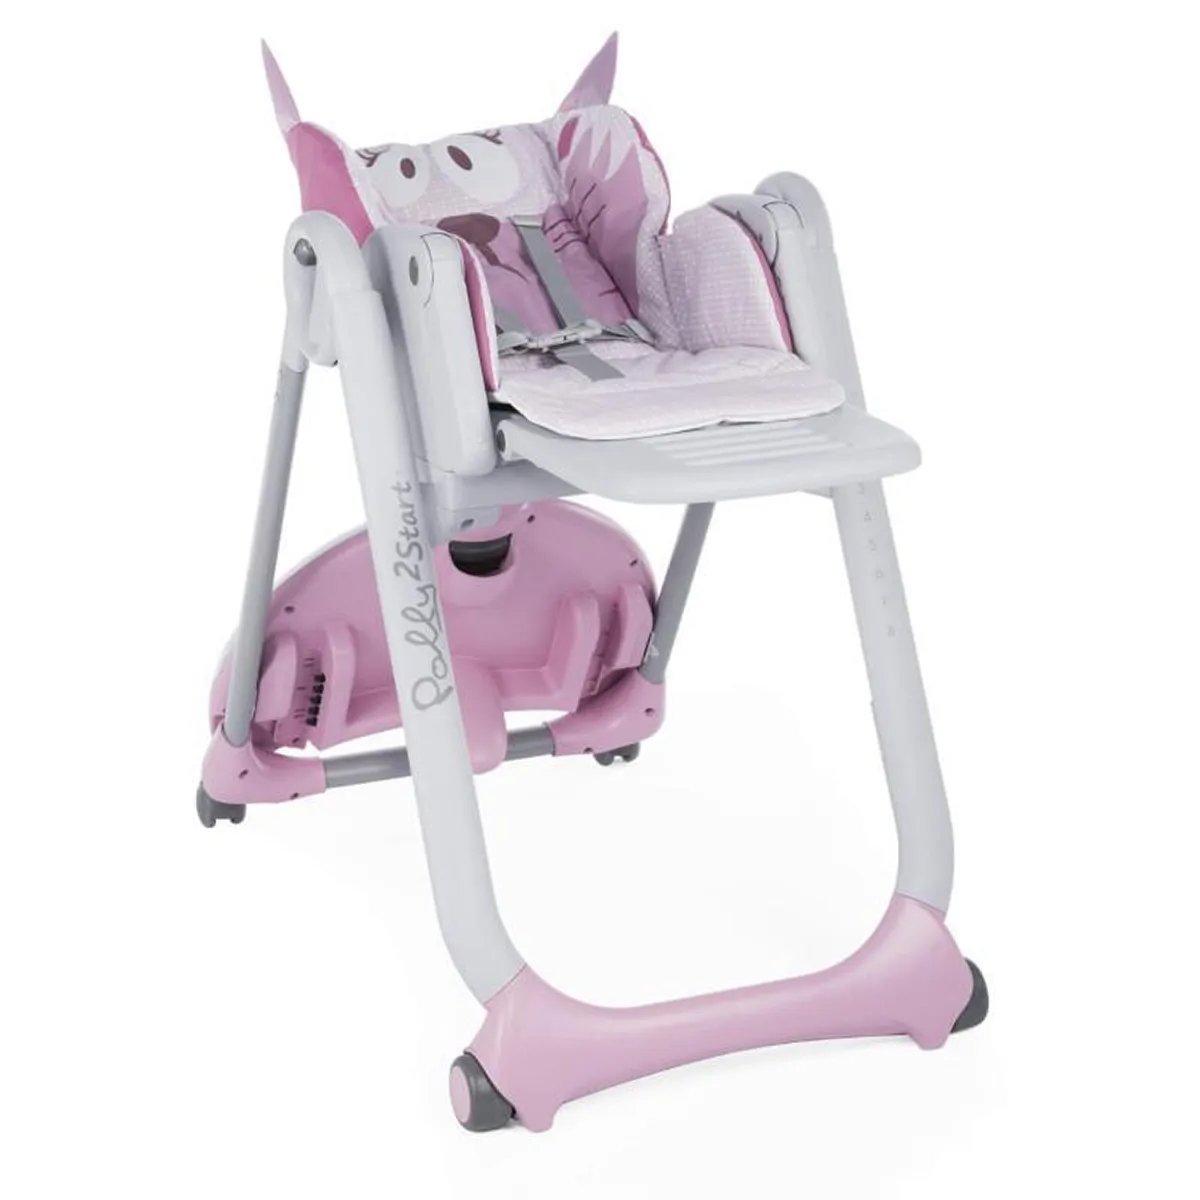 Chicco hranilica Polly 2 Start, miss pink